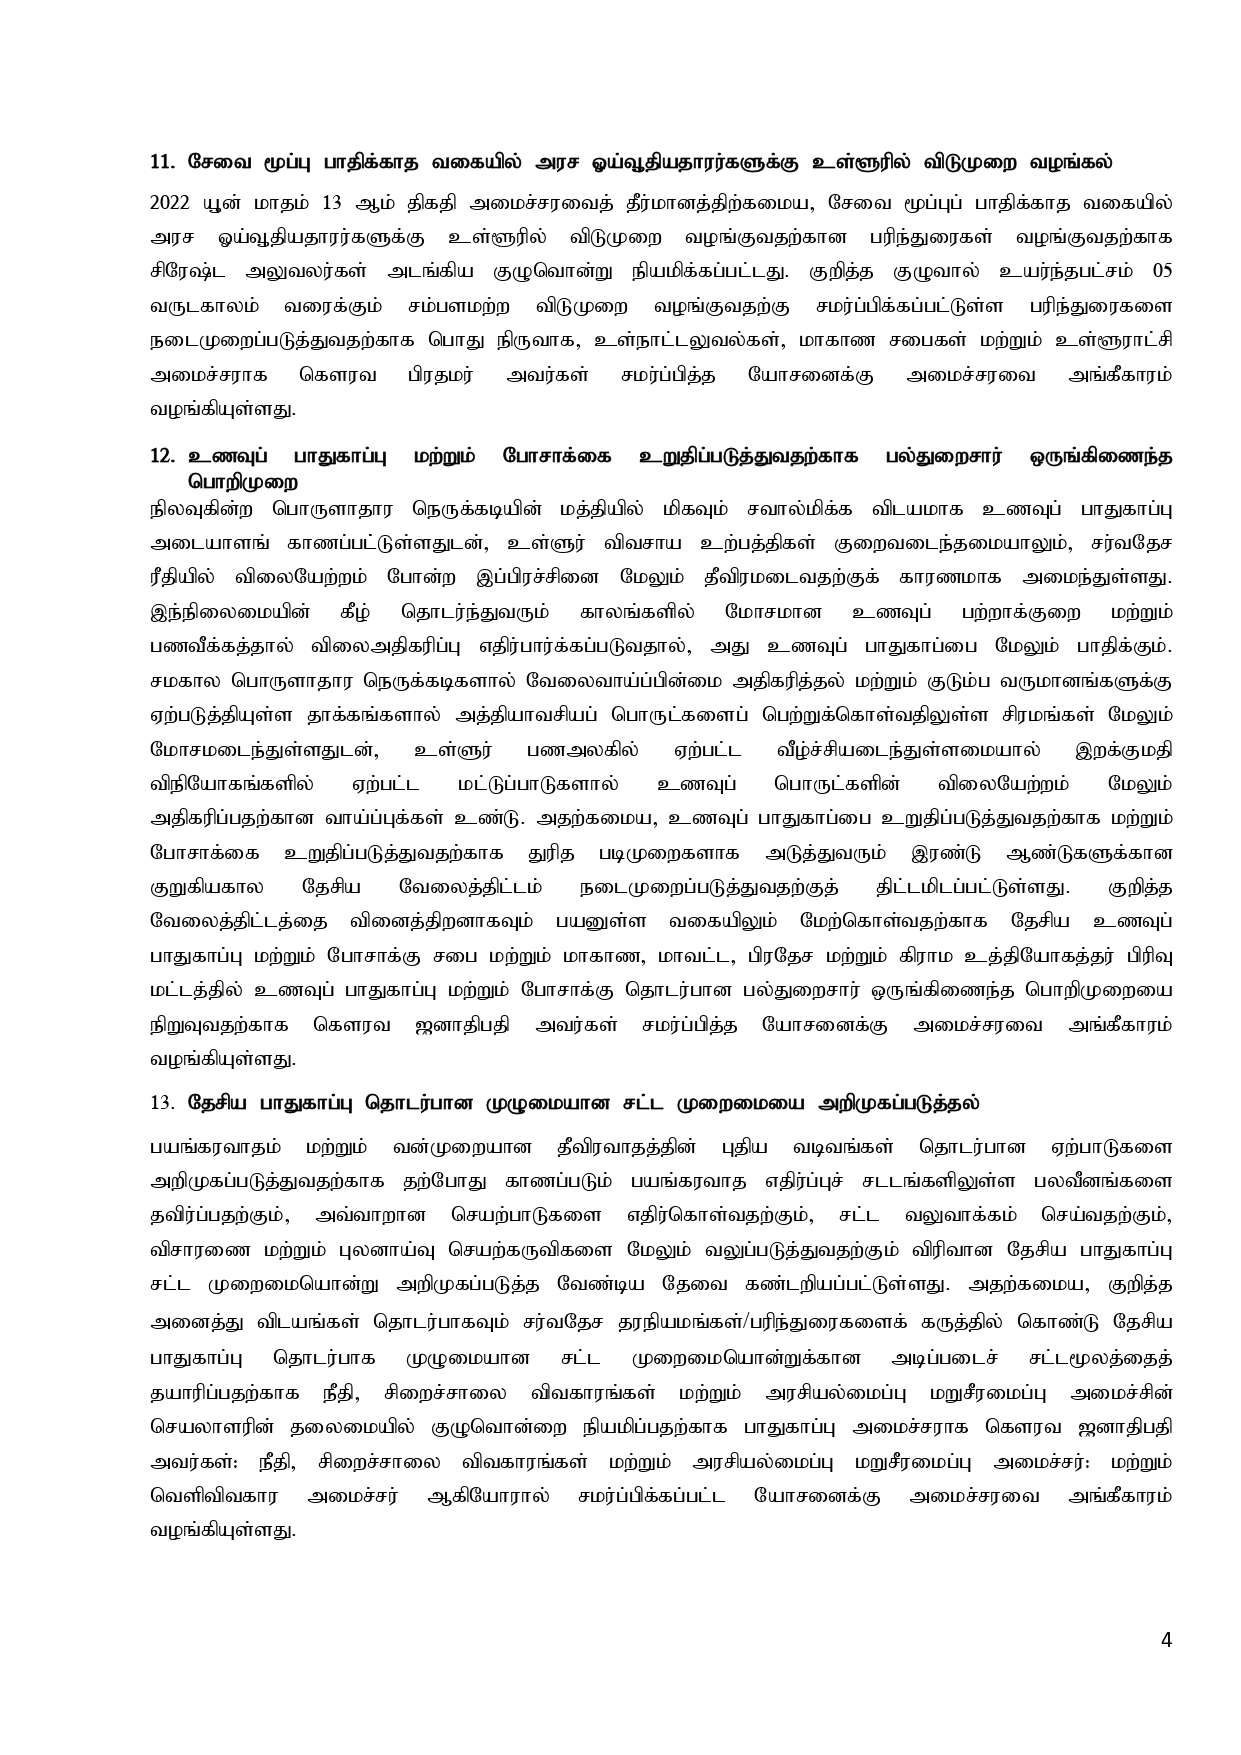 Cabinet Decisions on 05.09.2022 Tamil page 0004